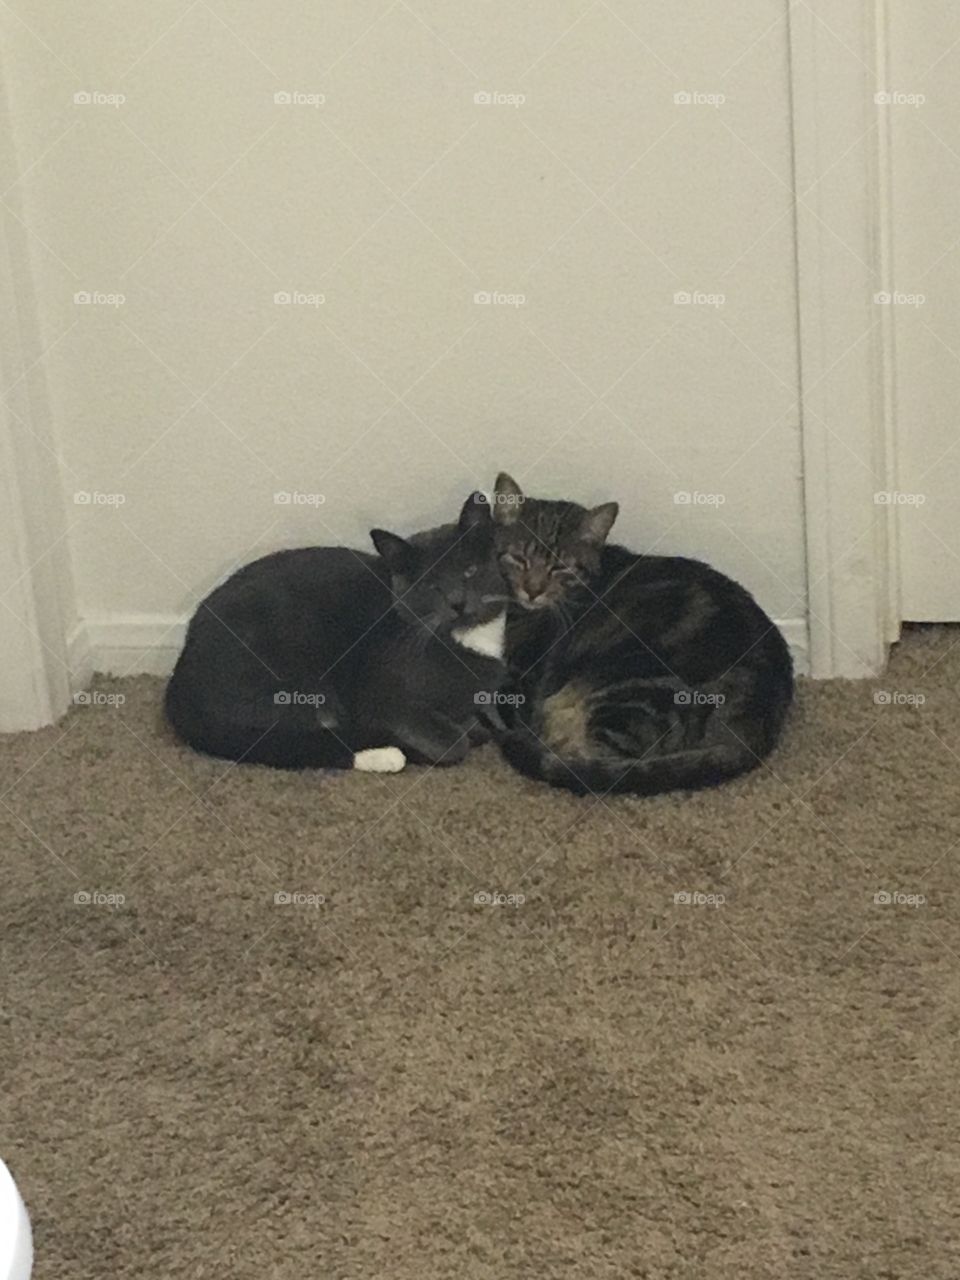 My two cats sleeps together